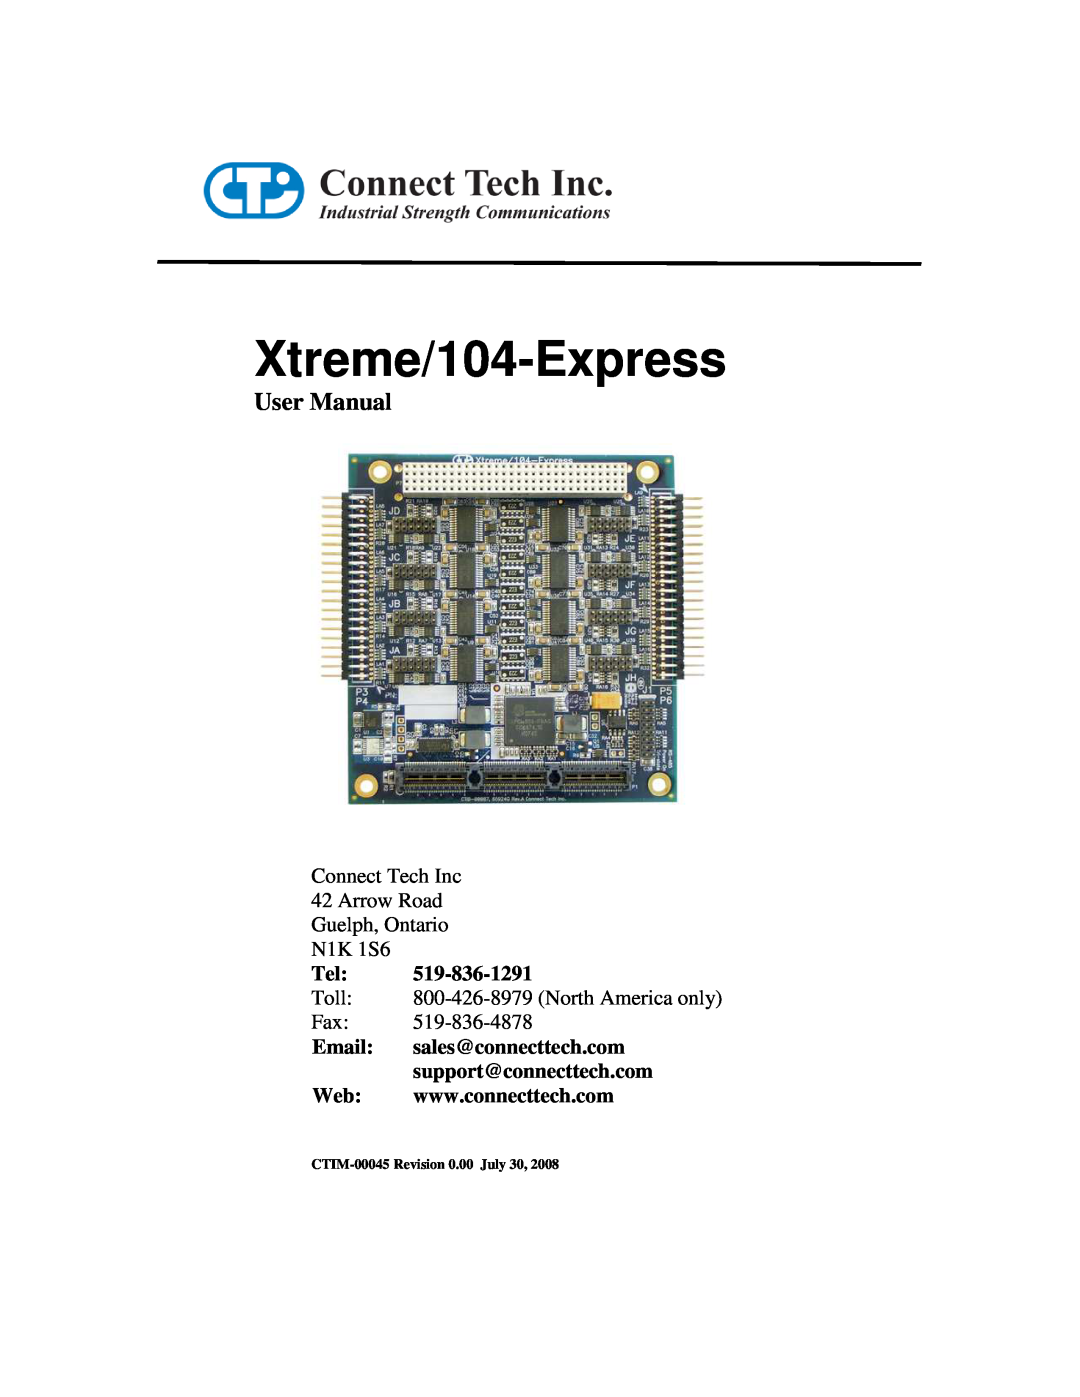 Connect Tech user manual Xtreme/104-Express, User Manual, Connect Tech Inc 42 Arrow Road Guelph, Ontario N1K 1S6, Toll 